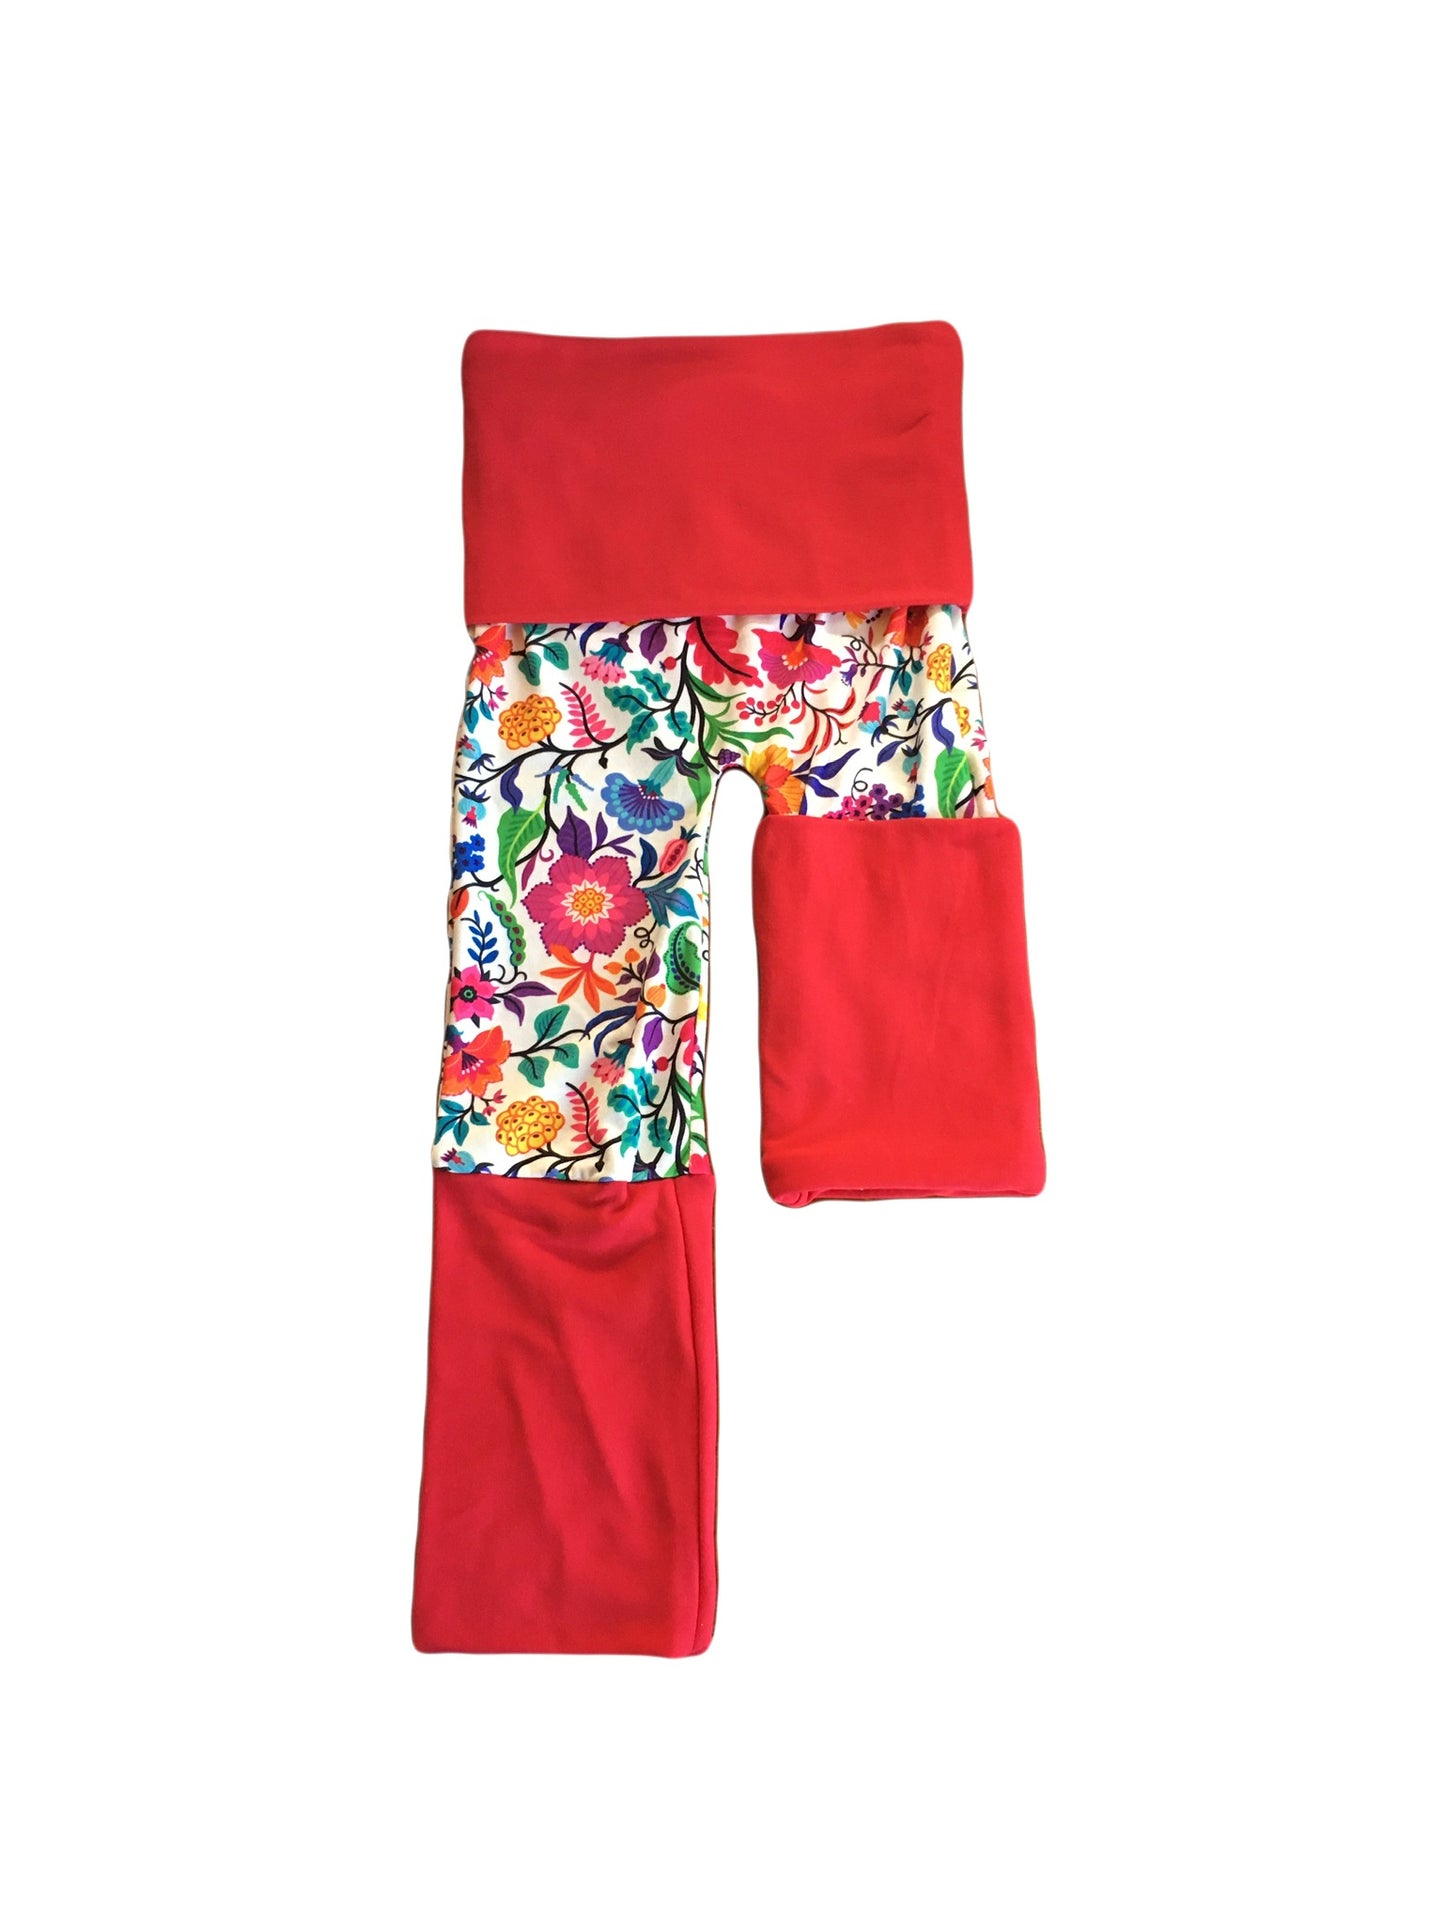 Adjustable Pants - Flowers with Red